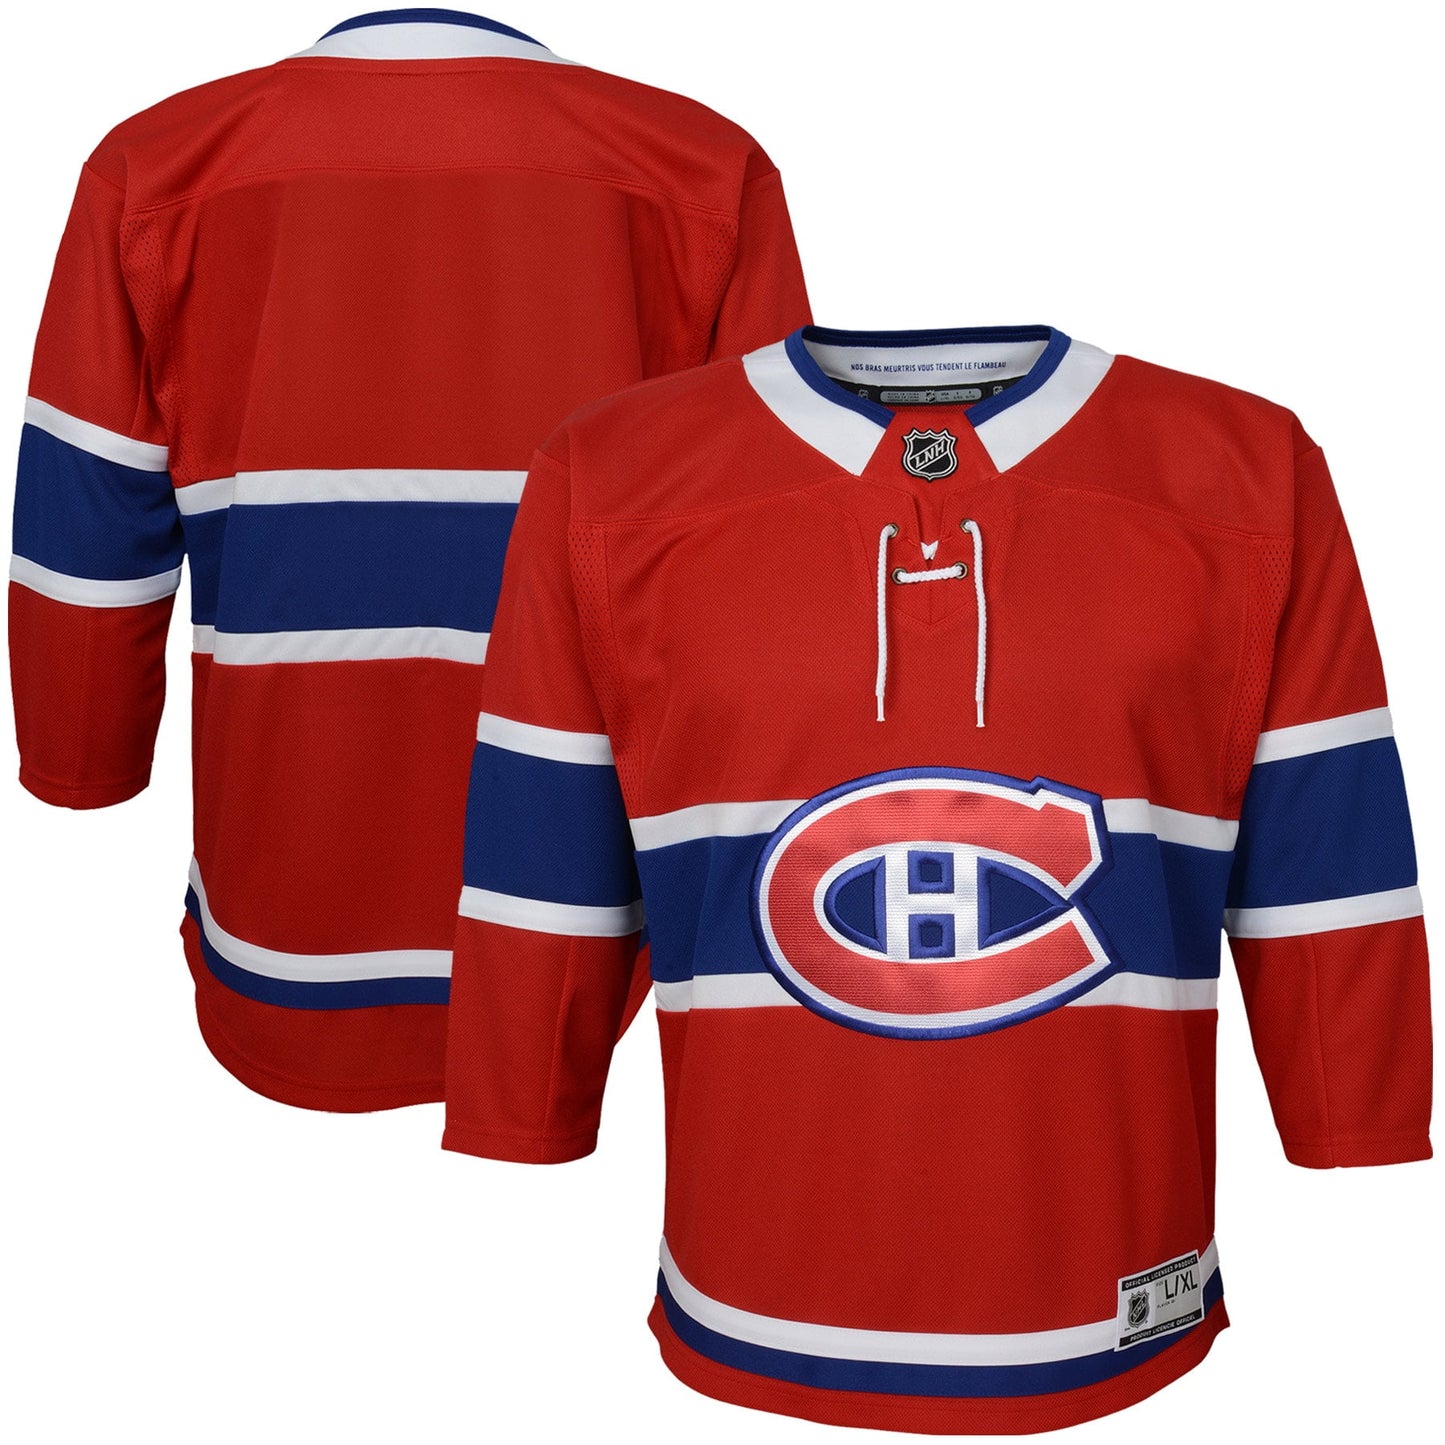 Youth Red Montreal Canadiens Home Premier Jersey